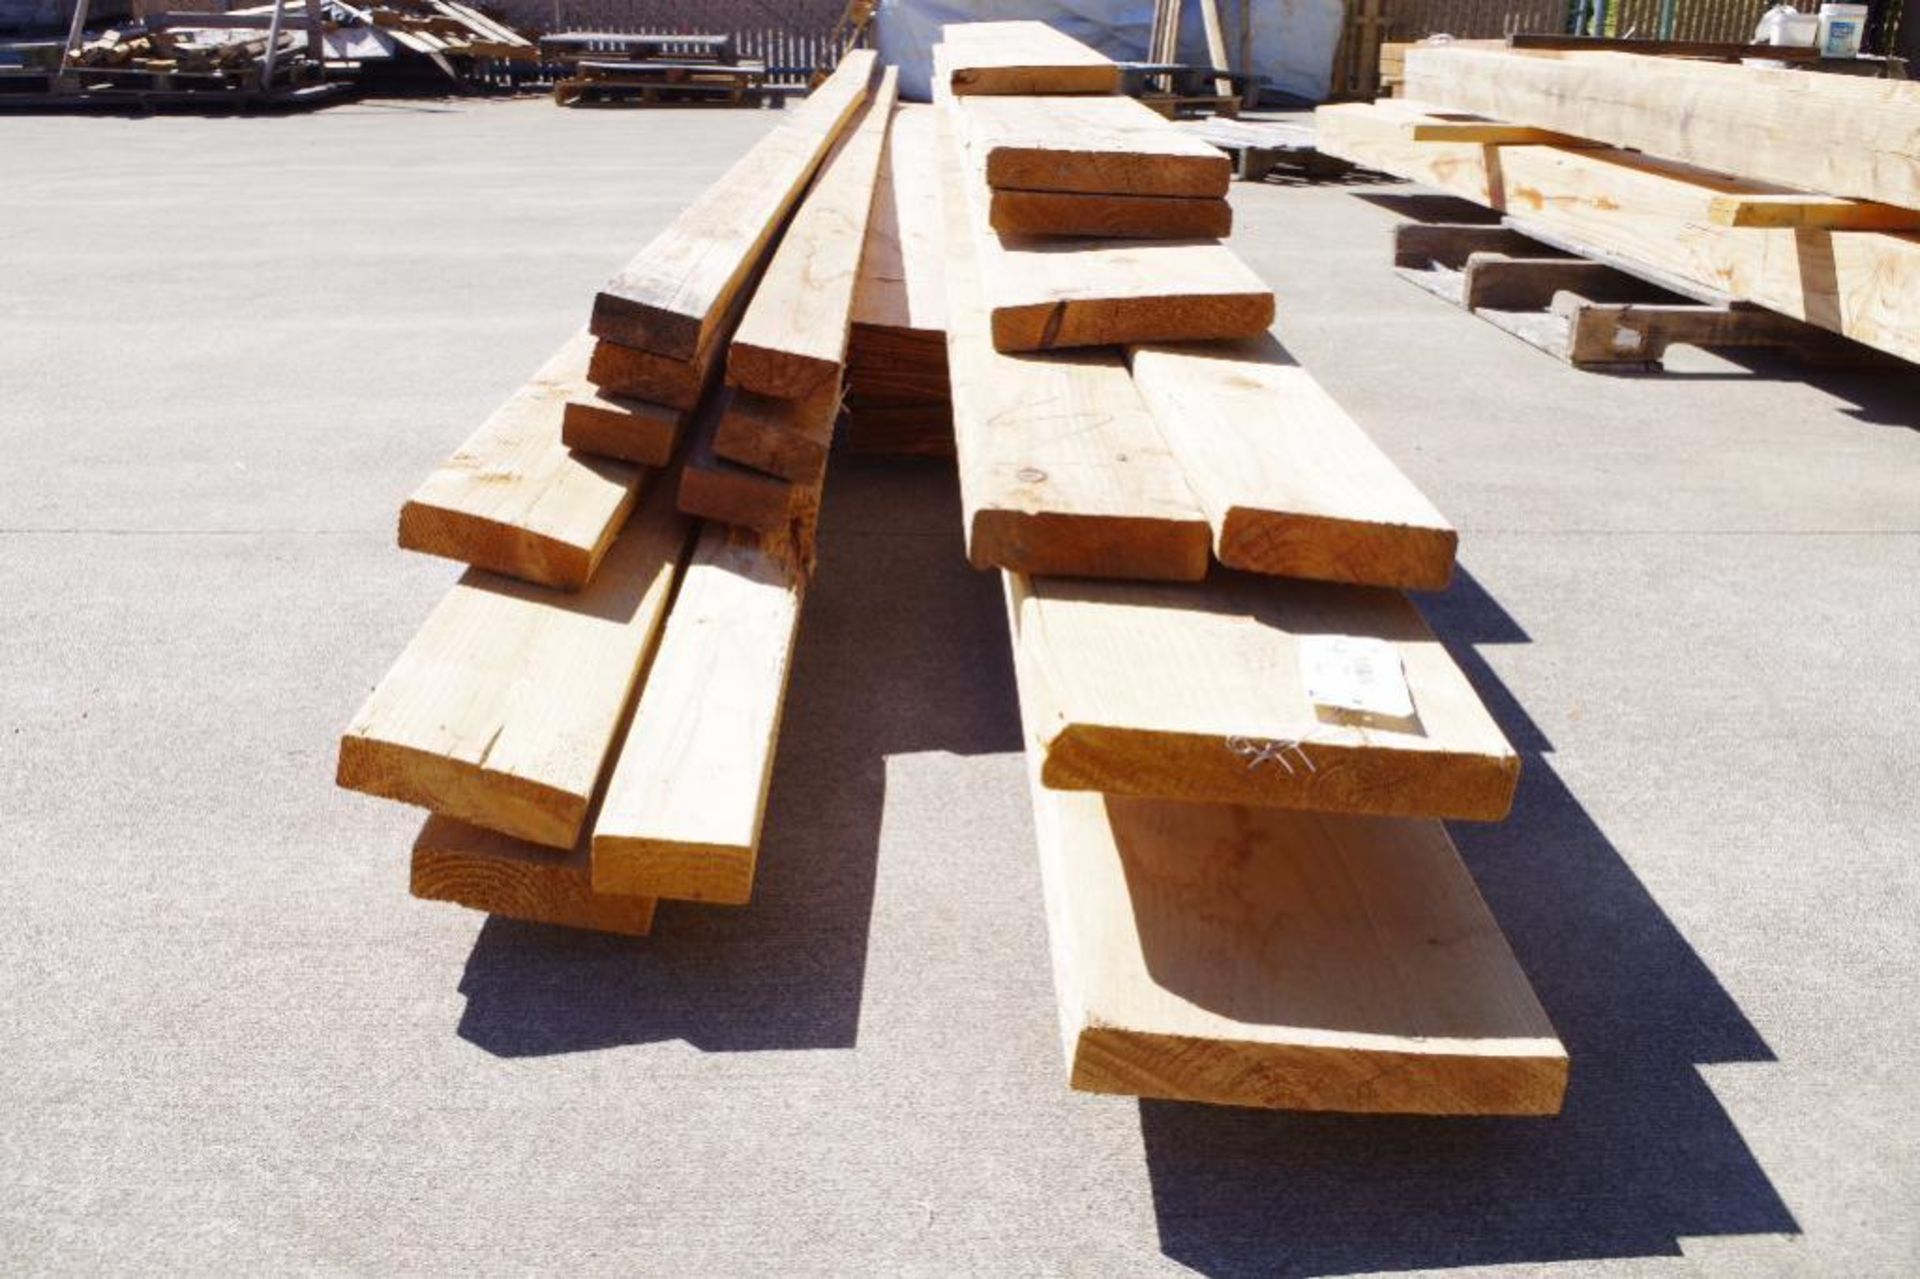 [QTY] Dimensional Lumber: 2x10s, 2x6s, 2x4s; Includes (12) 6" x 16' Cedar Bevel Siding Boards - Image 4 of 4